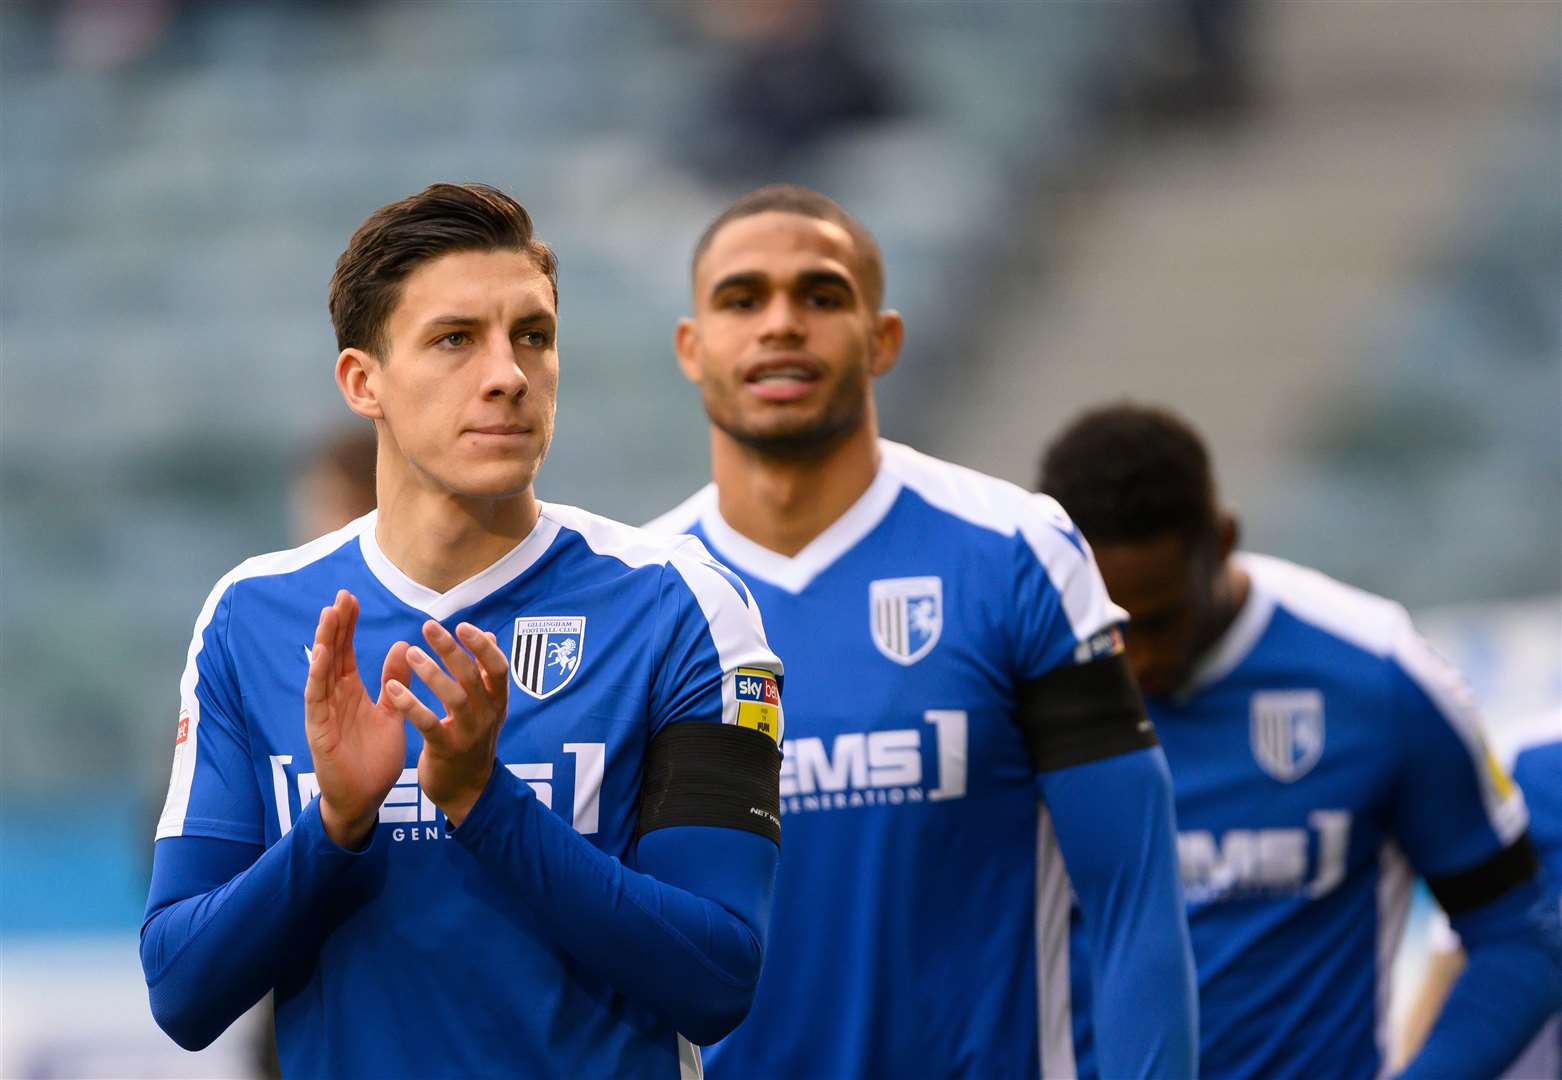 Alfie Jones played a crucial role to help keep Gills defensively sound